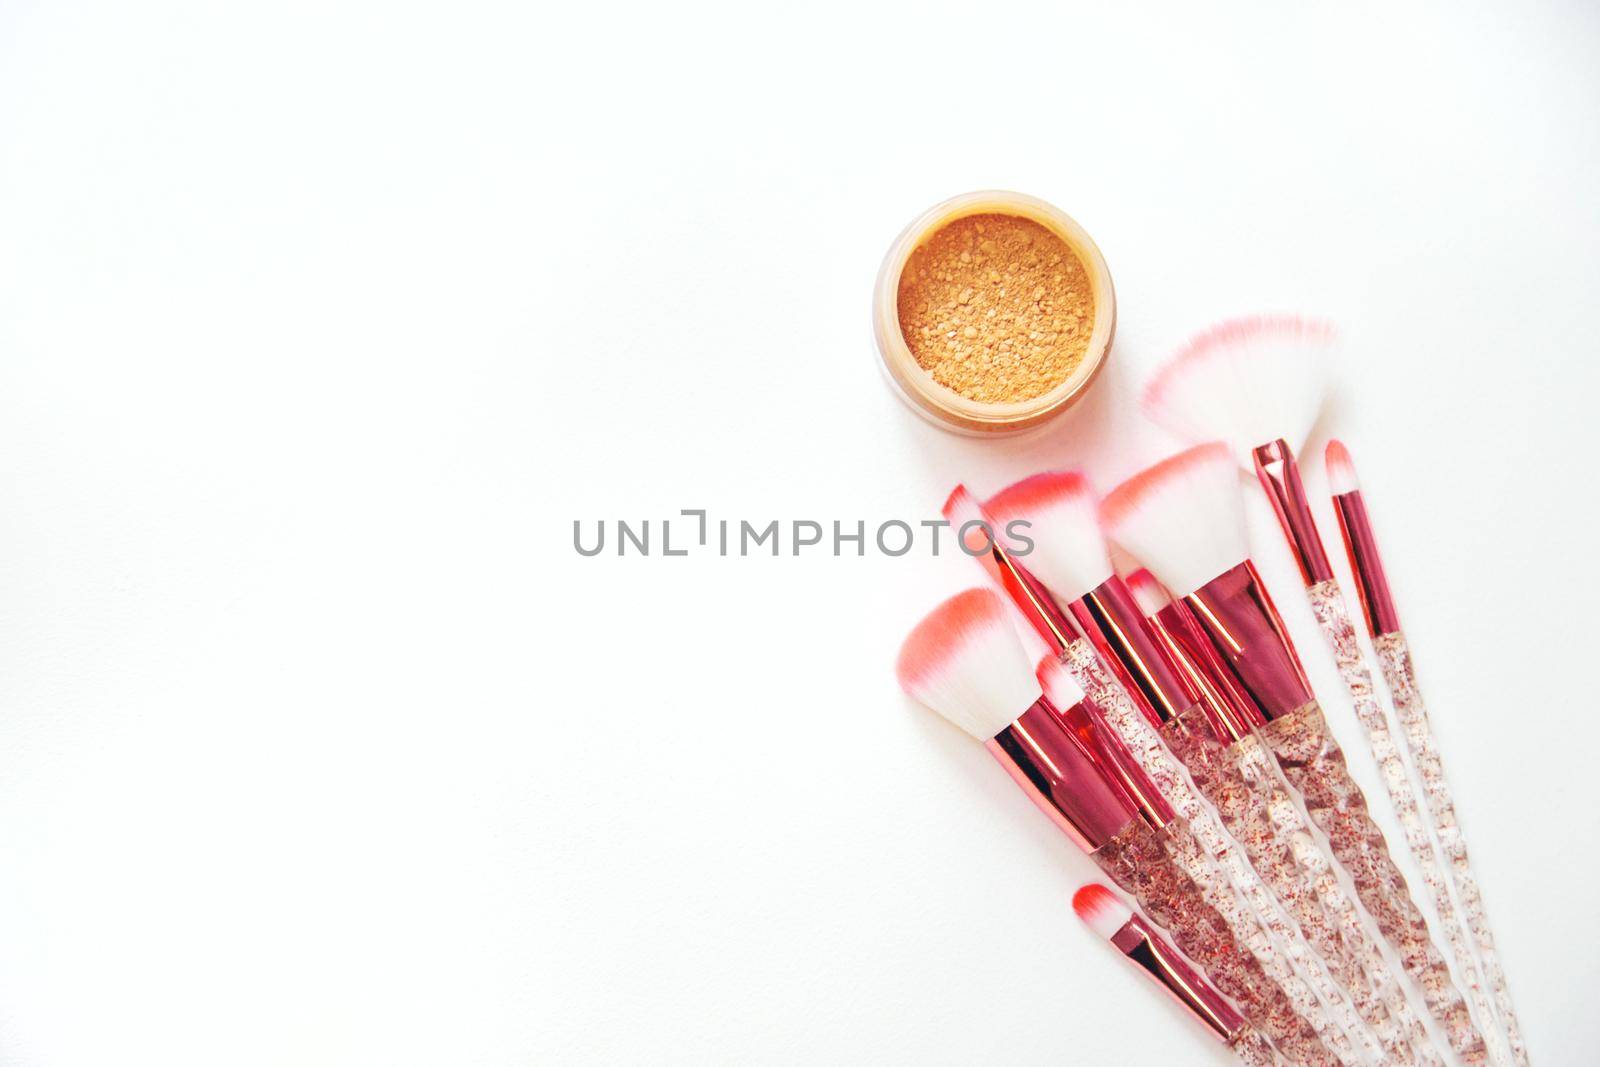 Makeup brushes and powder on a white background. Selective focus.